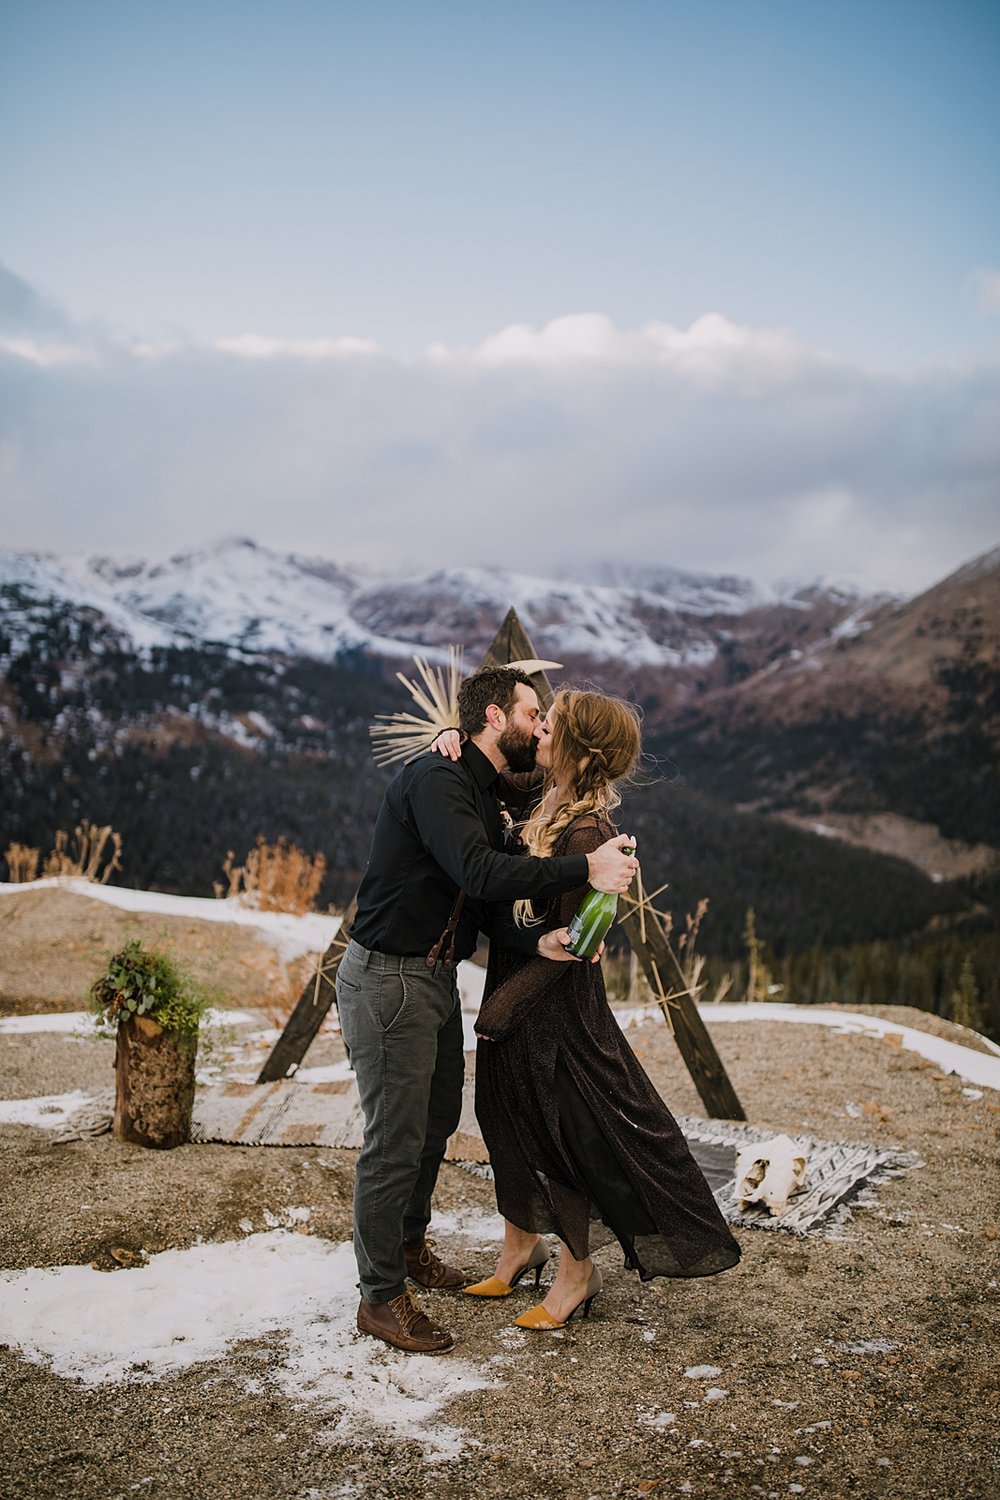 couple kissing post champagne pop, mountain top elopement, mountain top ceremony, high alpine mountain pass elopement, high alpine mountain pass wedding ceremony, mountain peak ceremony